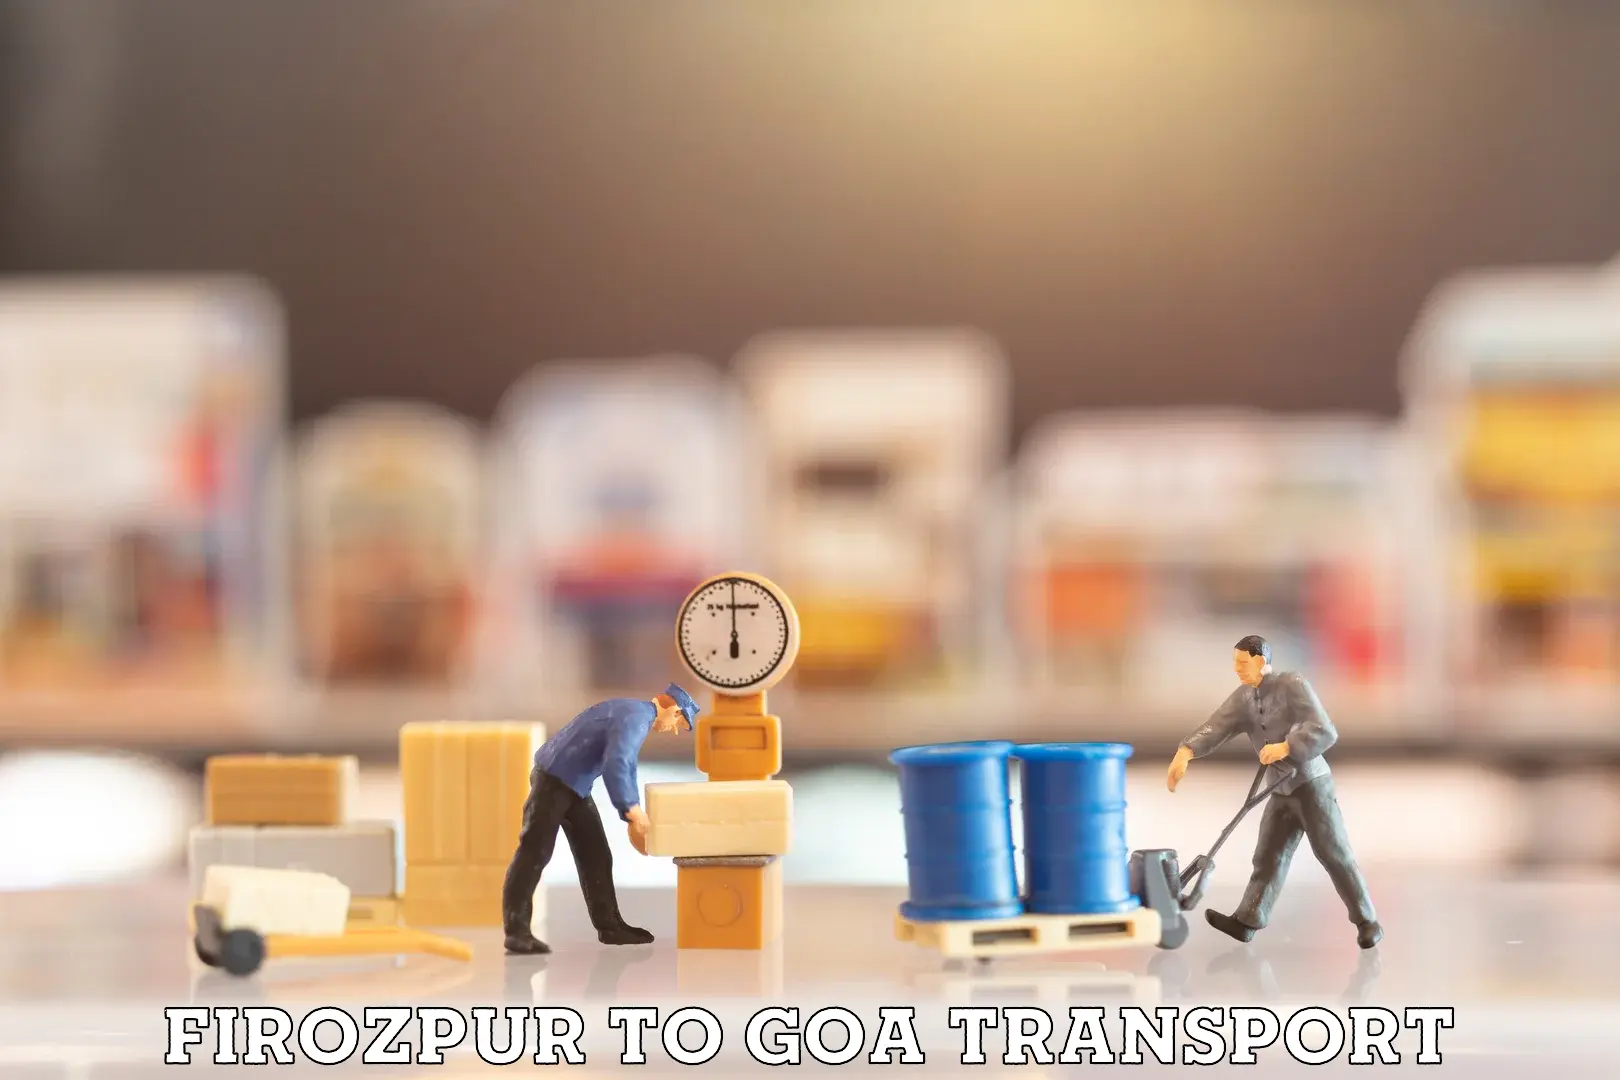 Container transport service Firozpur to Ponda